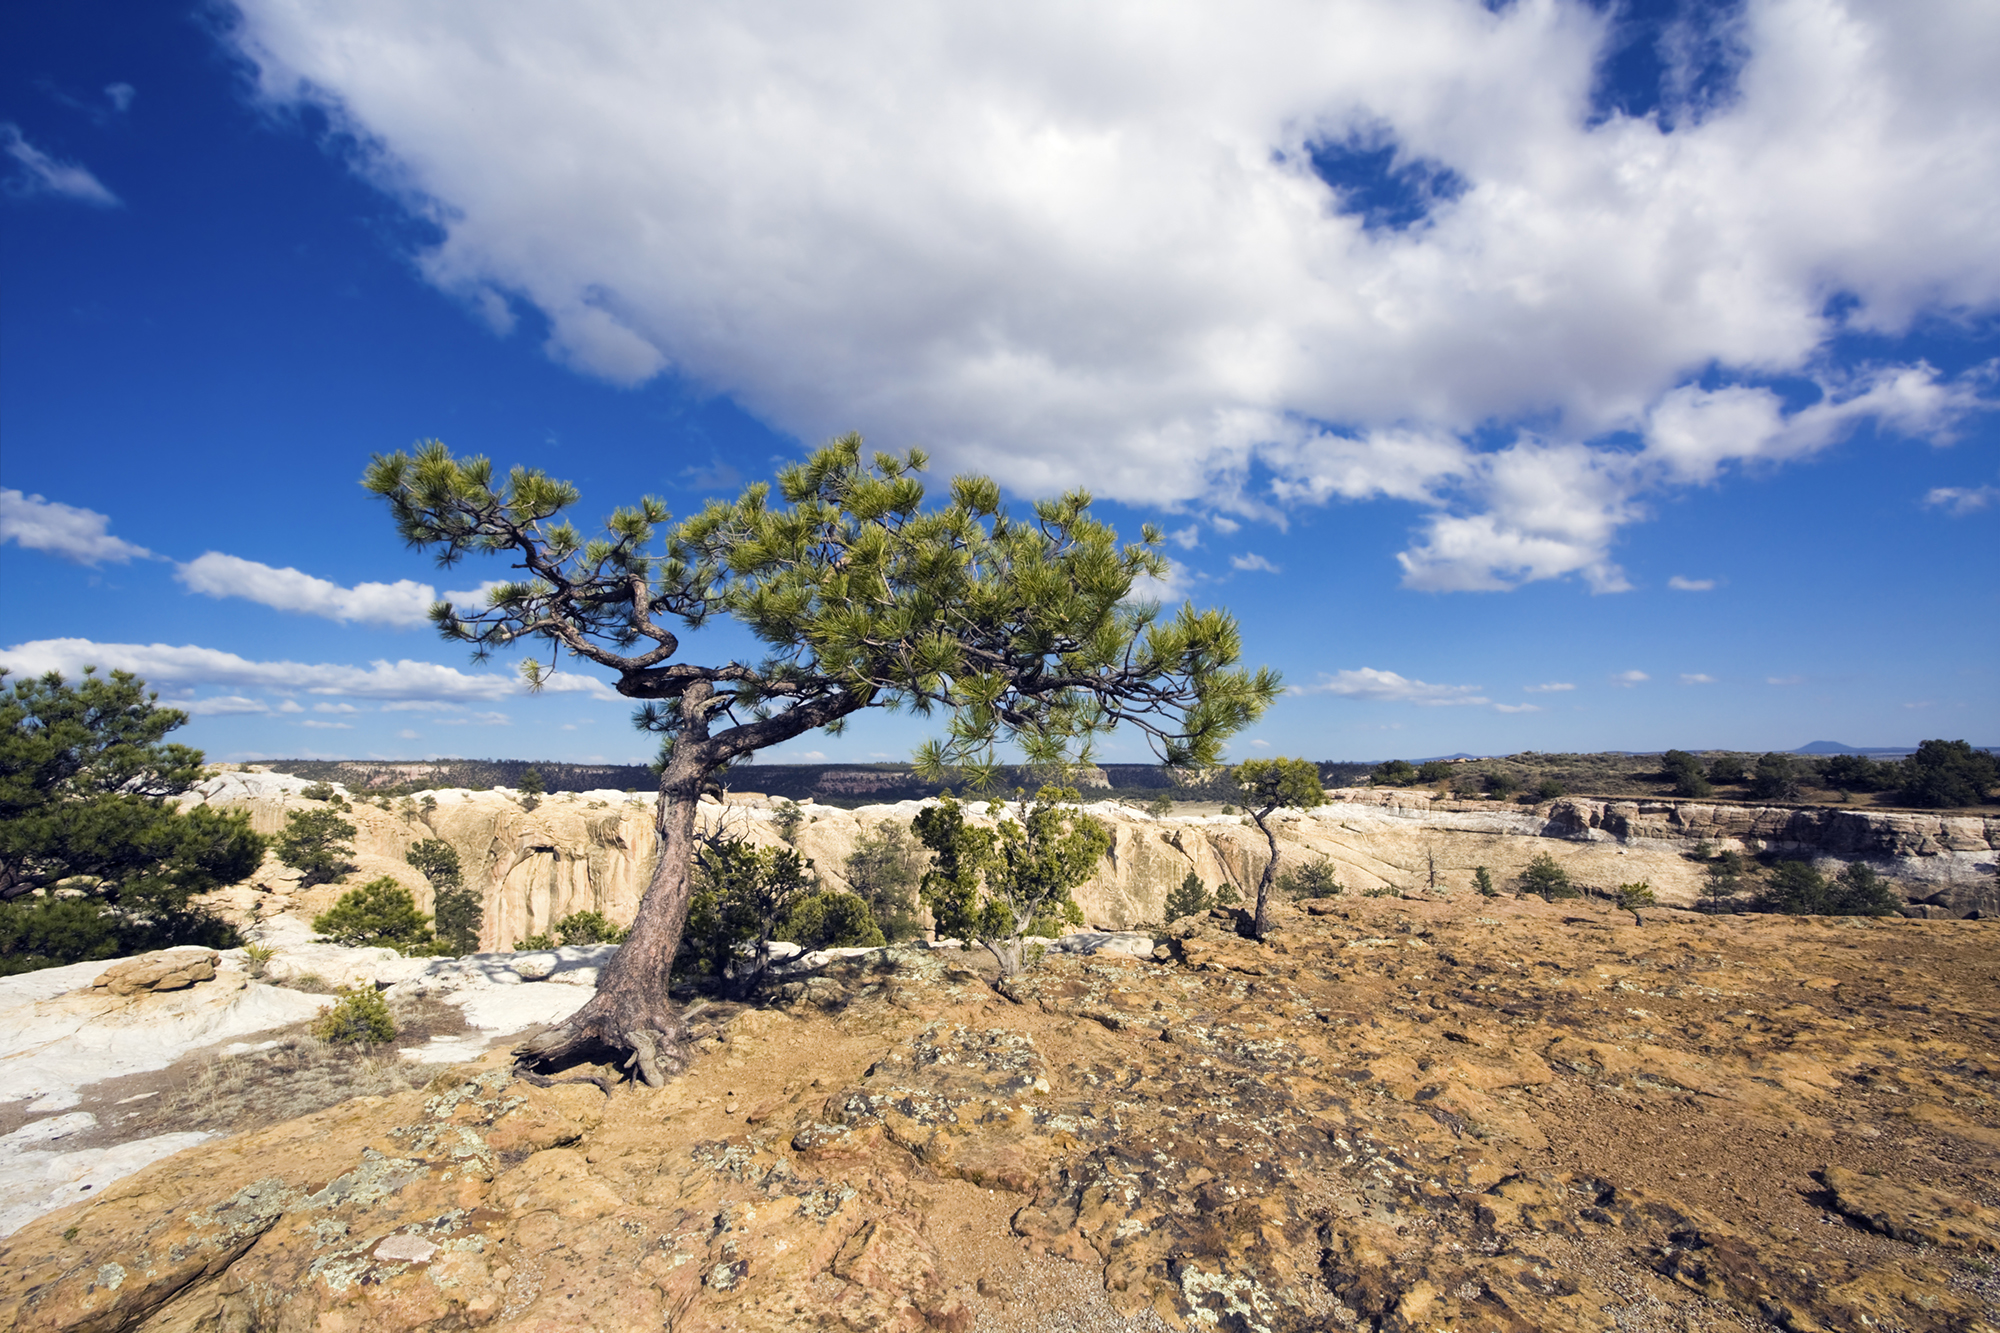 Lone tree against a blue sky on rocky landscape.